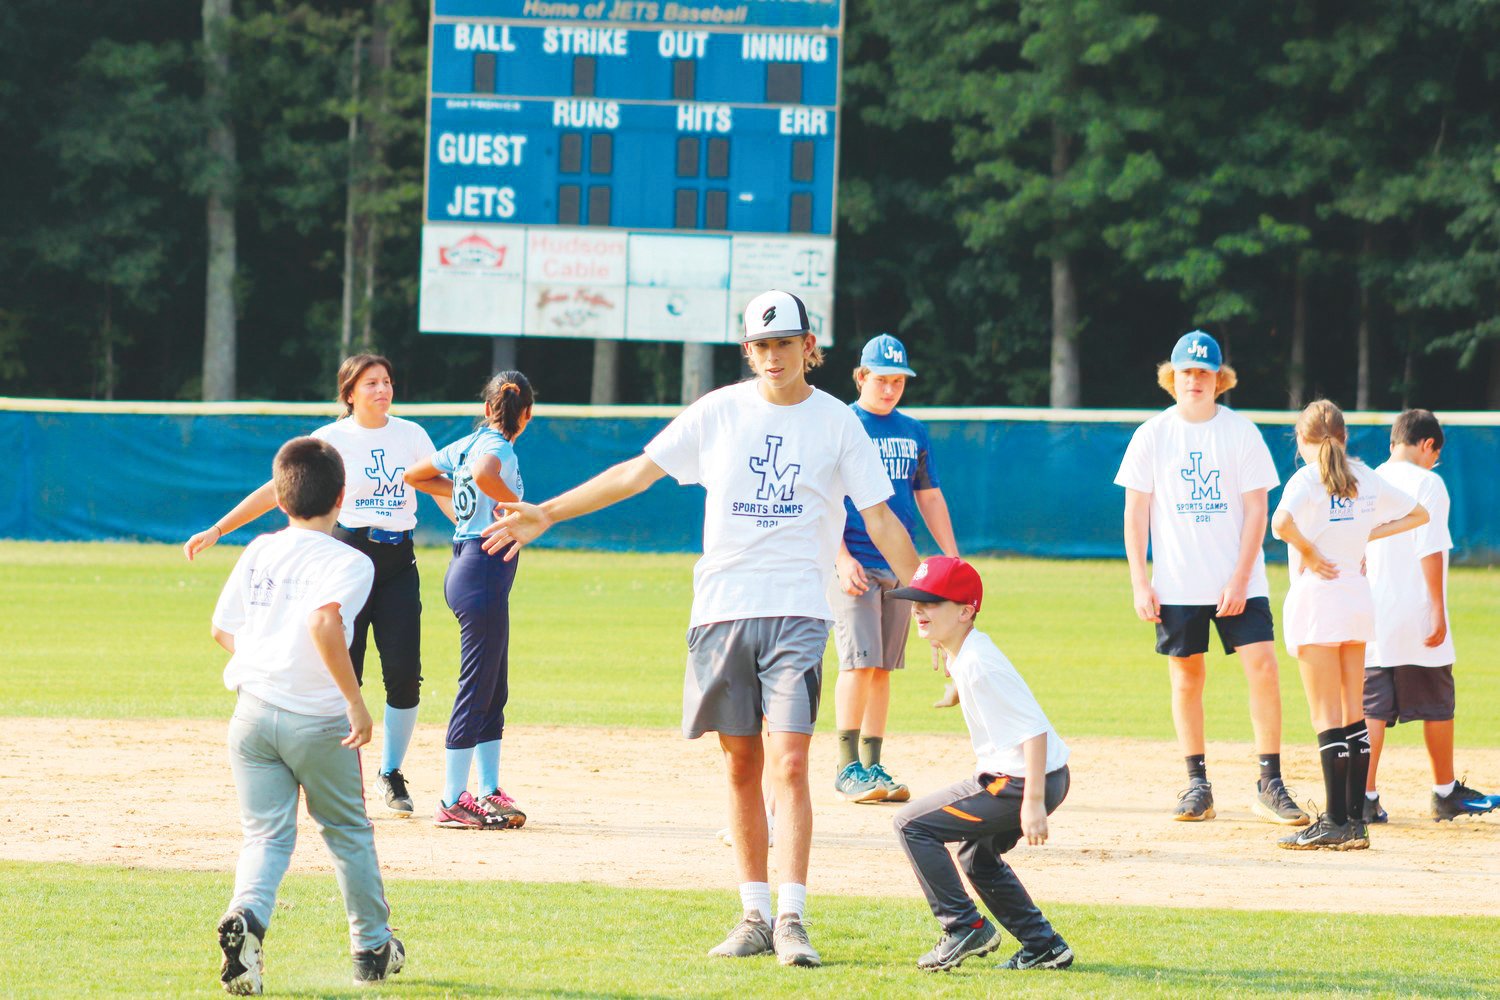 Jordan-Matthews volunteer camp counselor and baseball player Kelton Fuquay keeps spirits high among the campers during the final day of the Jets' youth baseball/softball camp on July 22, 2021. In total, 75 campers attended — the highest number of any J-M camp last year.